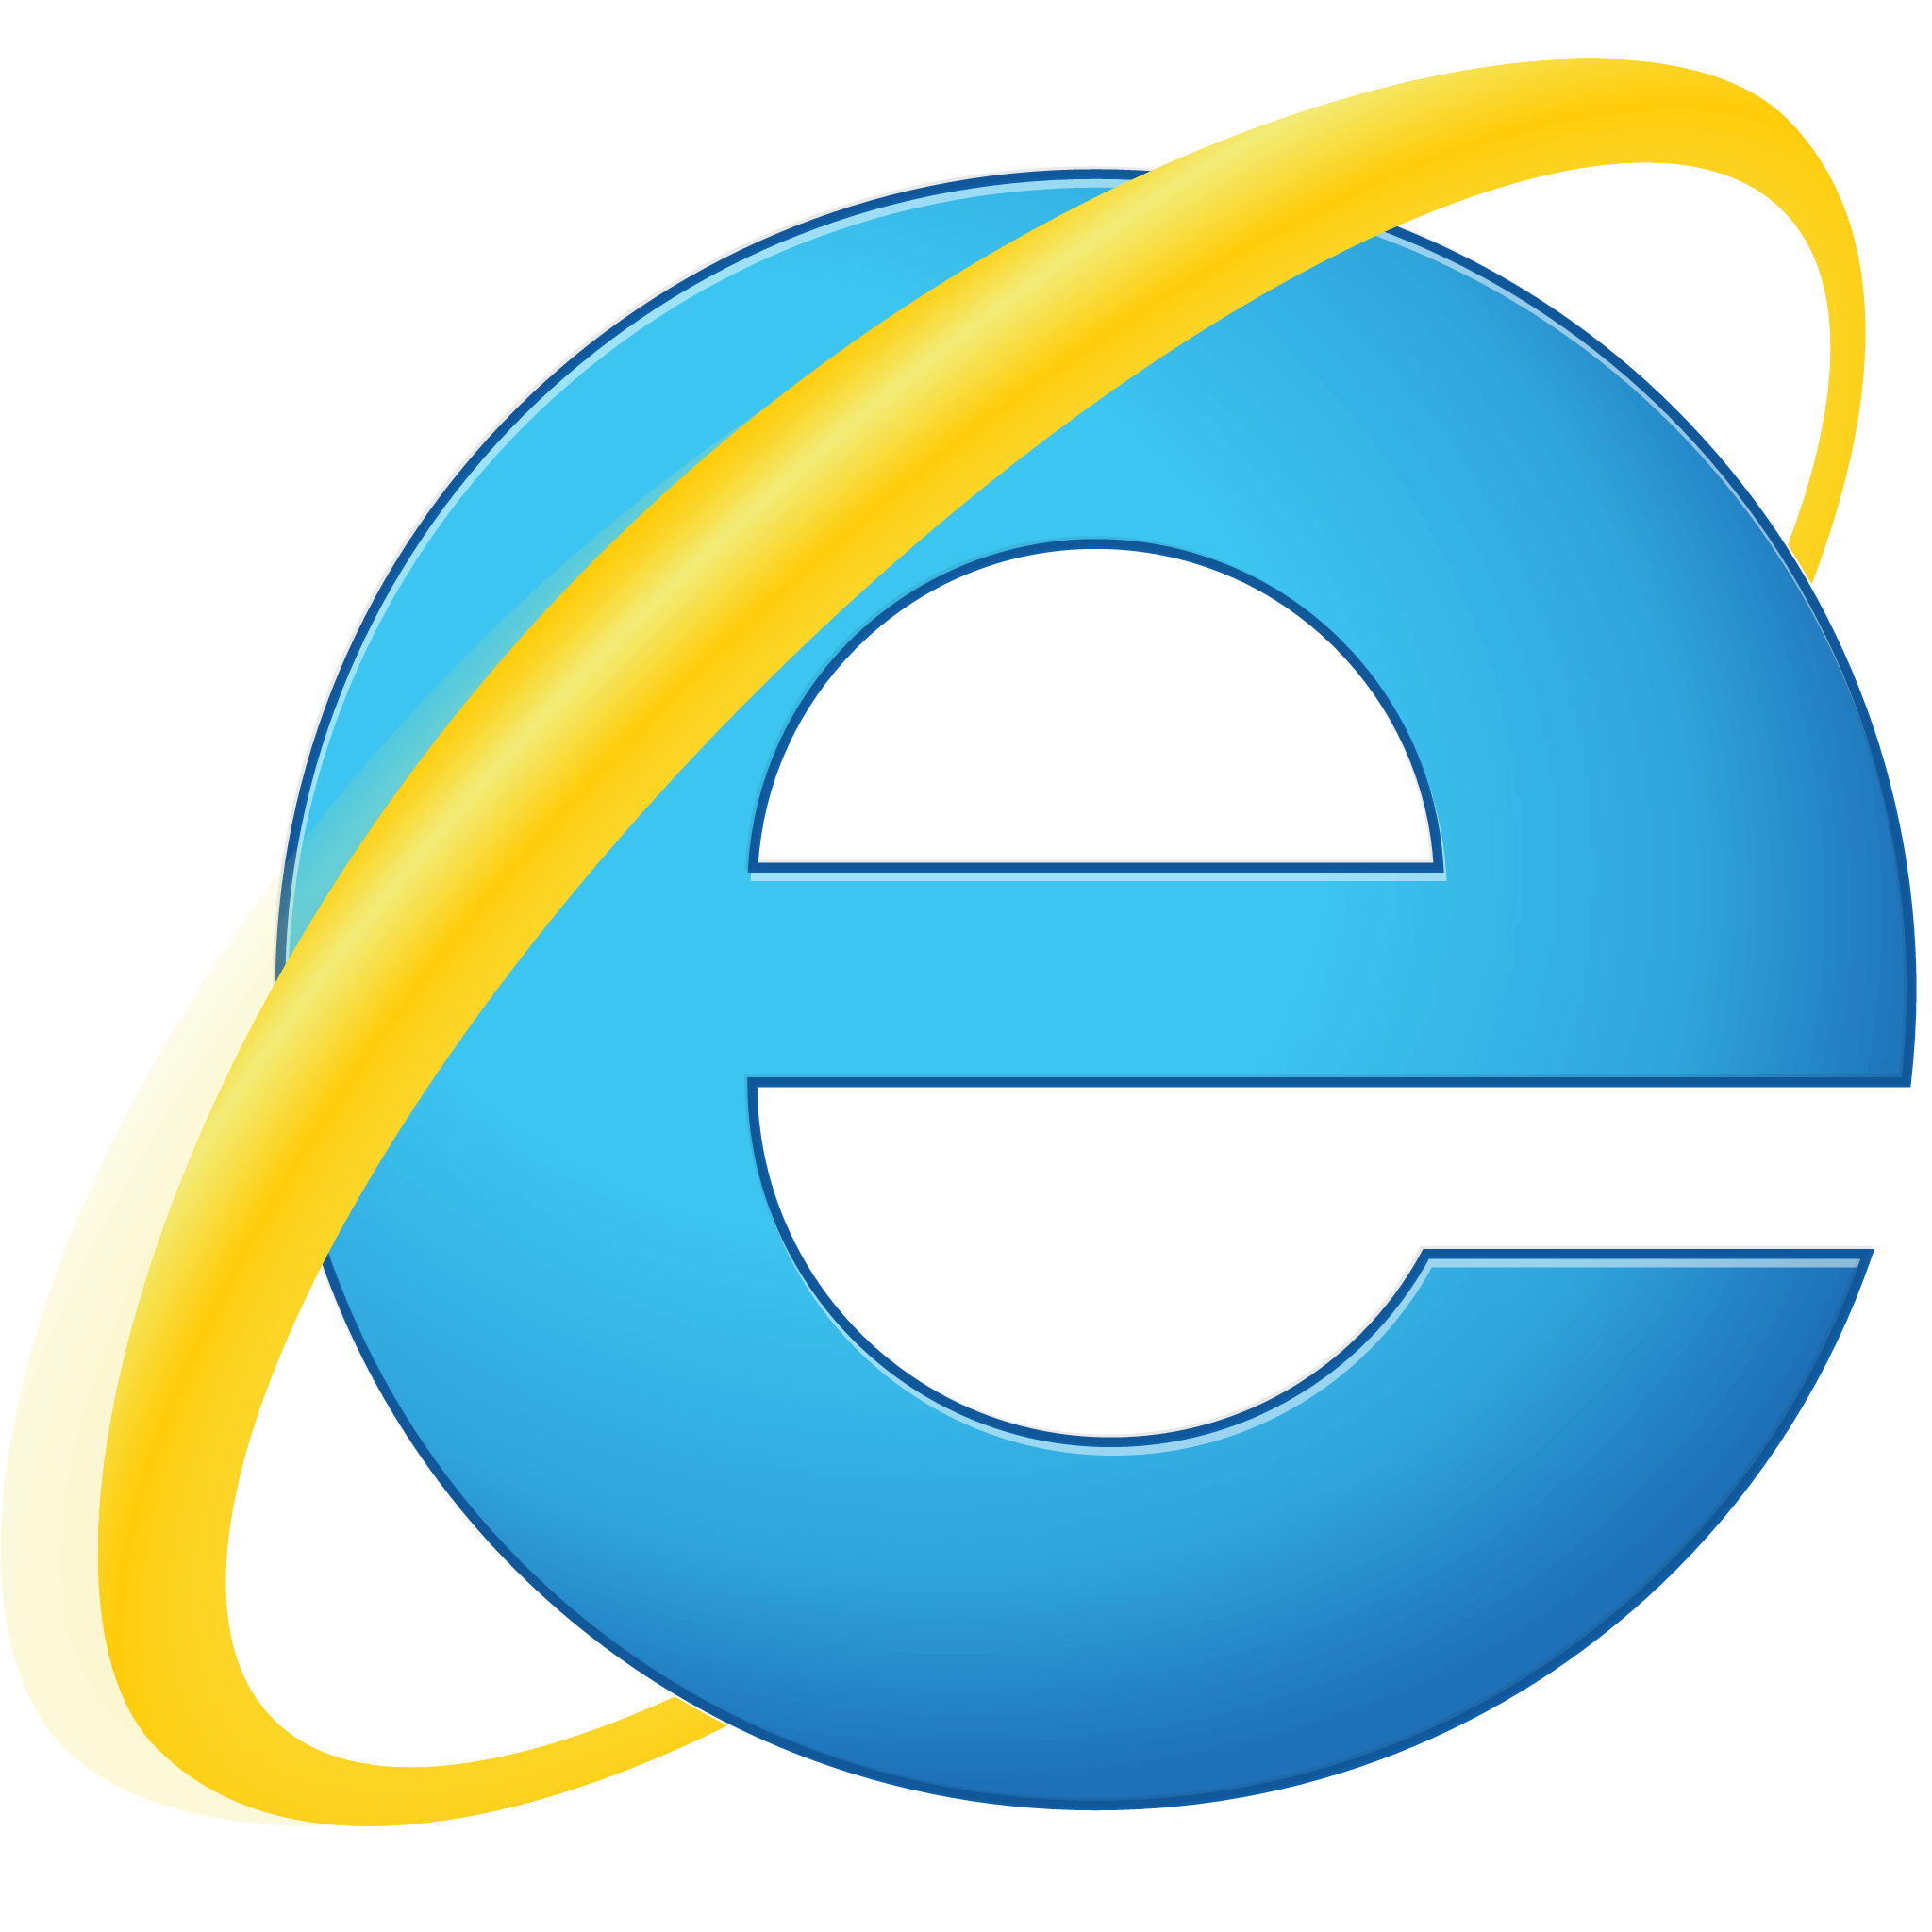 The Internet in Korea relies entirely on Internet Explorer